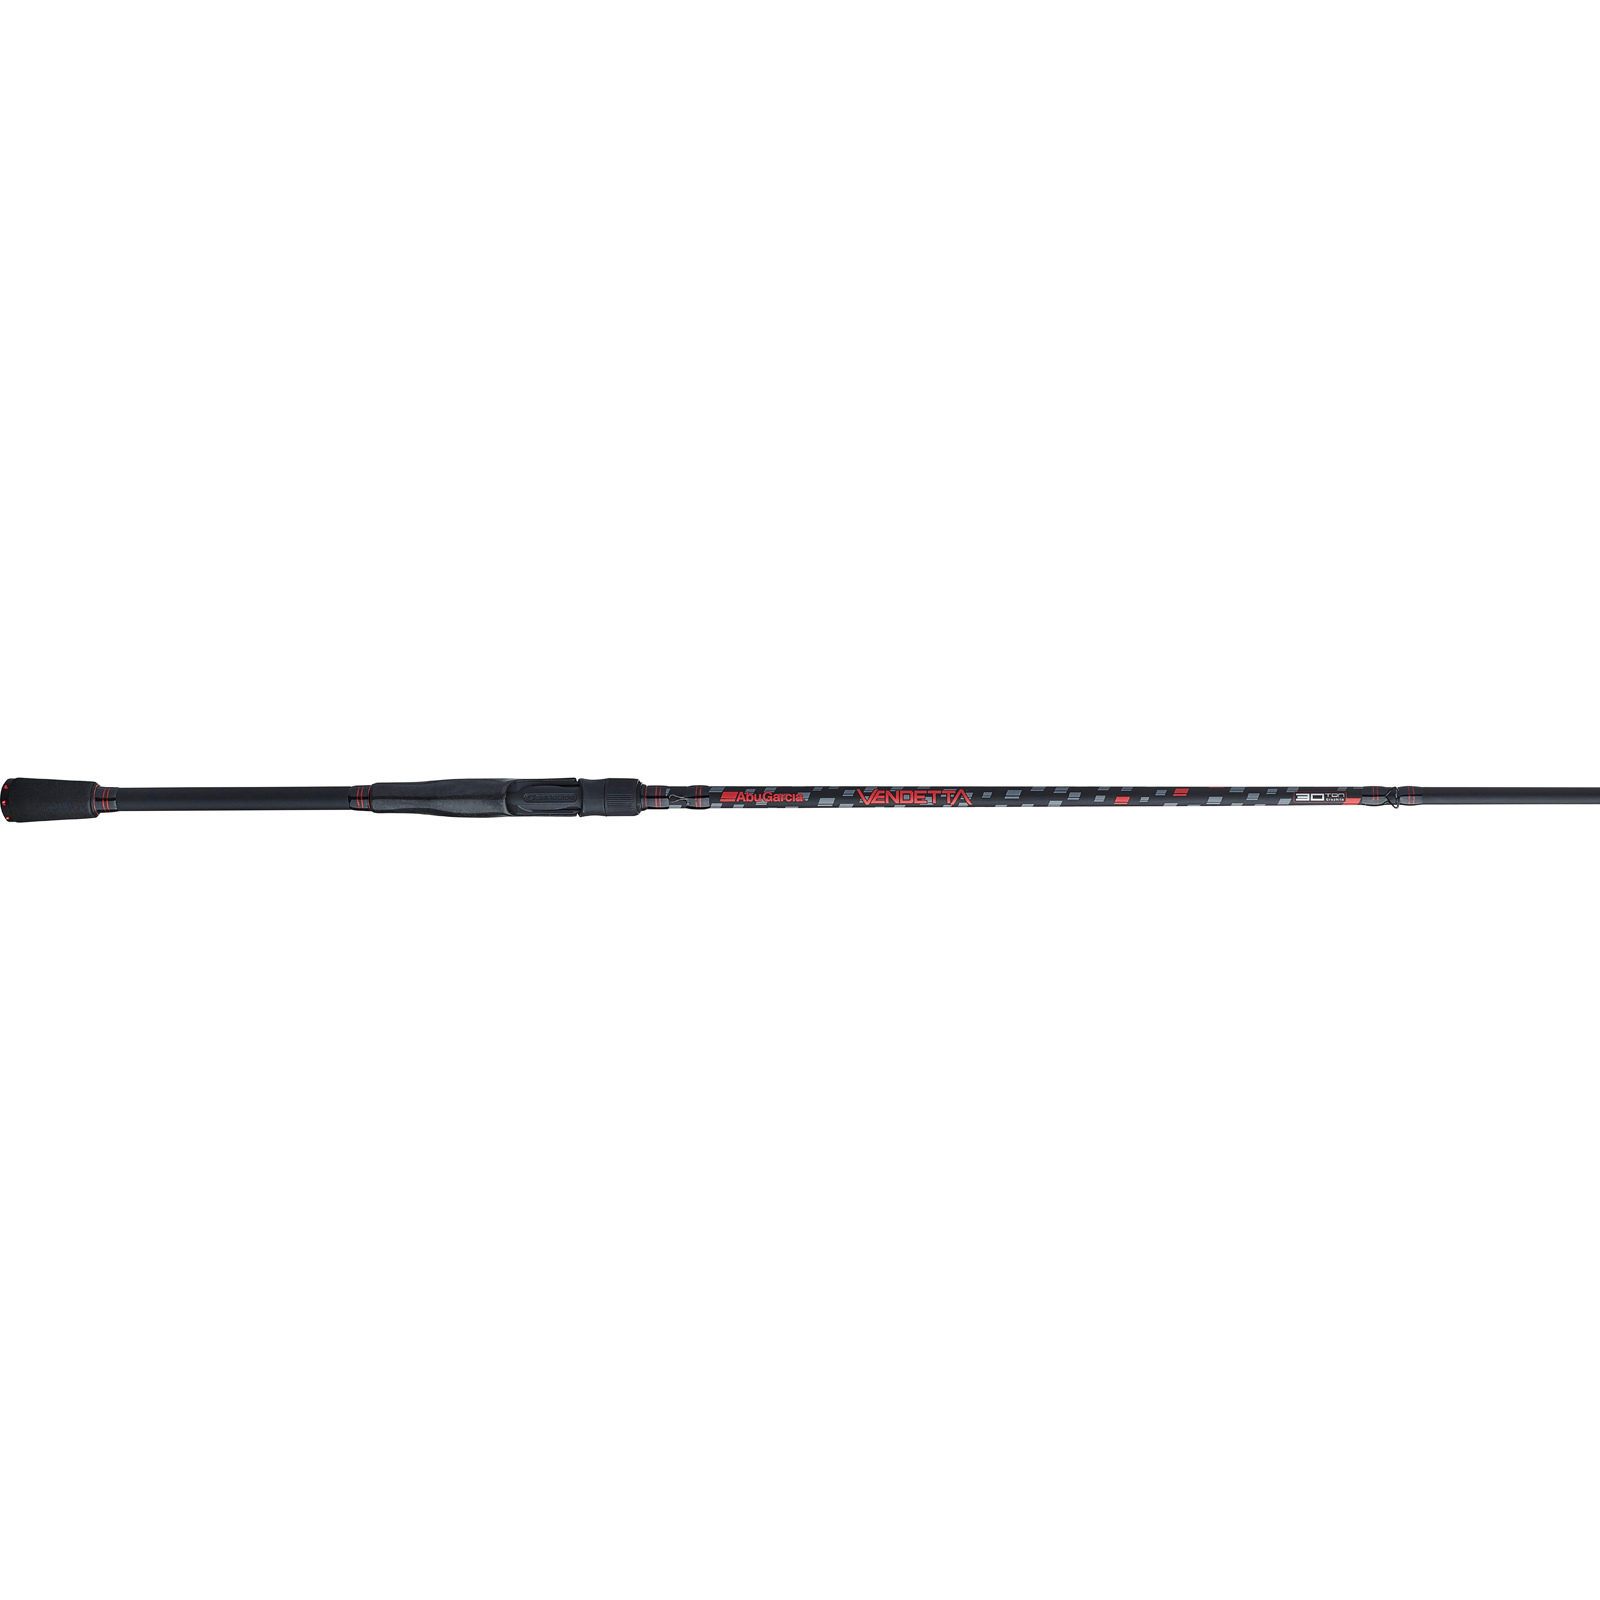  Abu Garcia 6' Max PRO Fishing Rod and Reel Spincast Combo,  2-Piece Composite Rod, Size 10 Casting Reel, Right/Left Handle Position  Grey : Everything Else